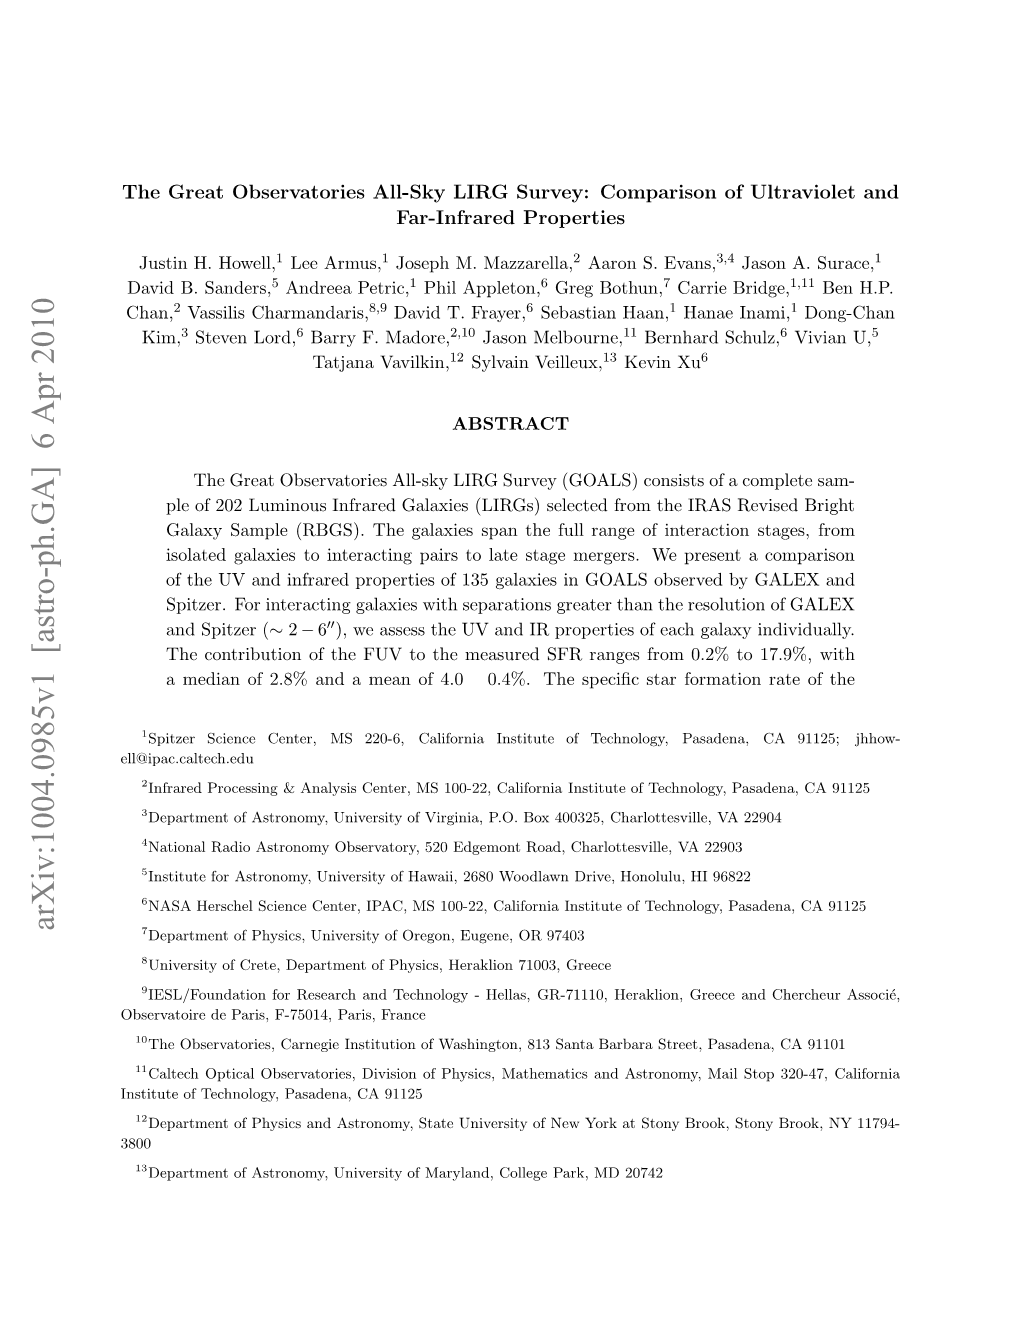 The Great Observatories All-Sky LIRG Survey: Comparison of Ultraviolet